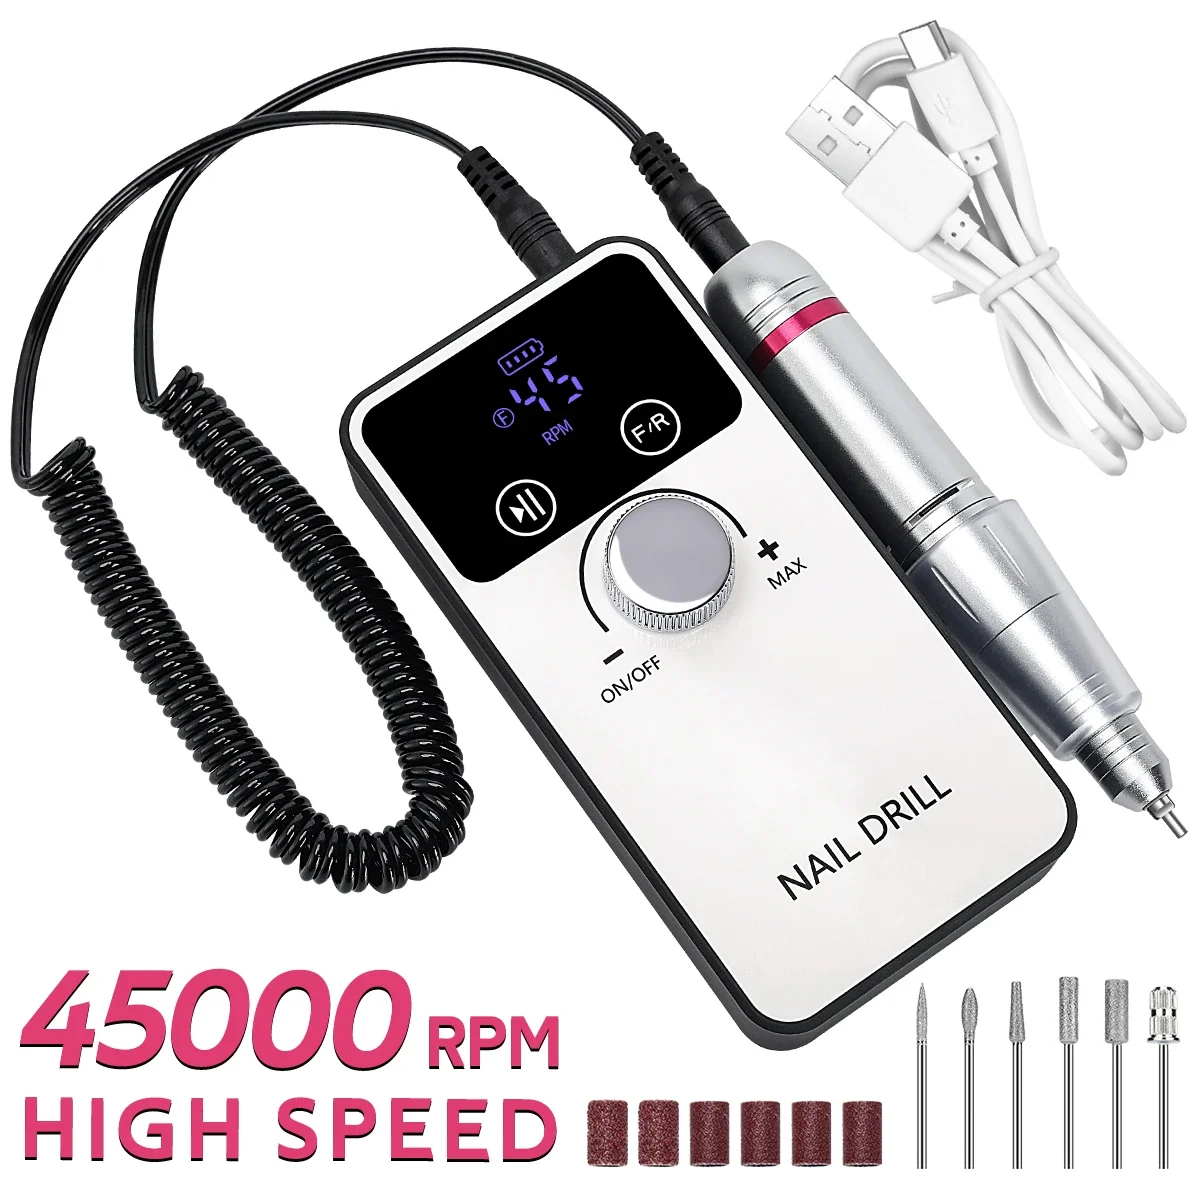 

Professional Nail Drill Portable Rechargeable Nail drill machine with Bits Kit for Acrylic Nails Gel Polishing Removing for home